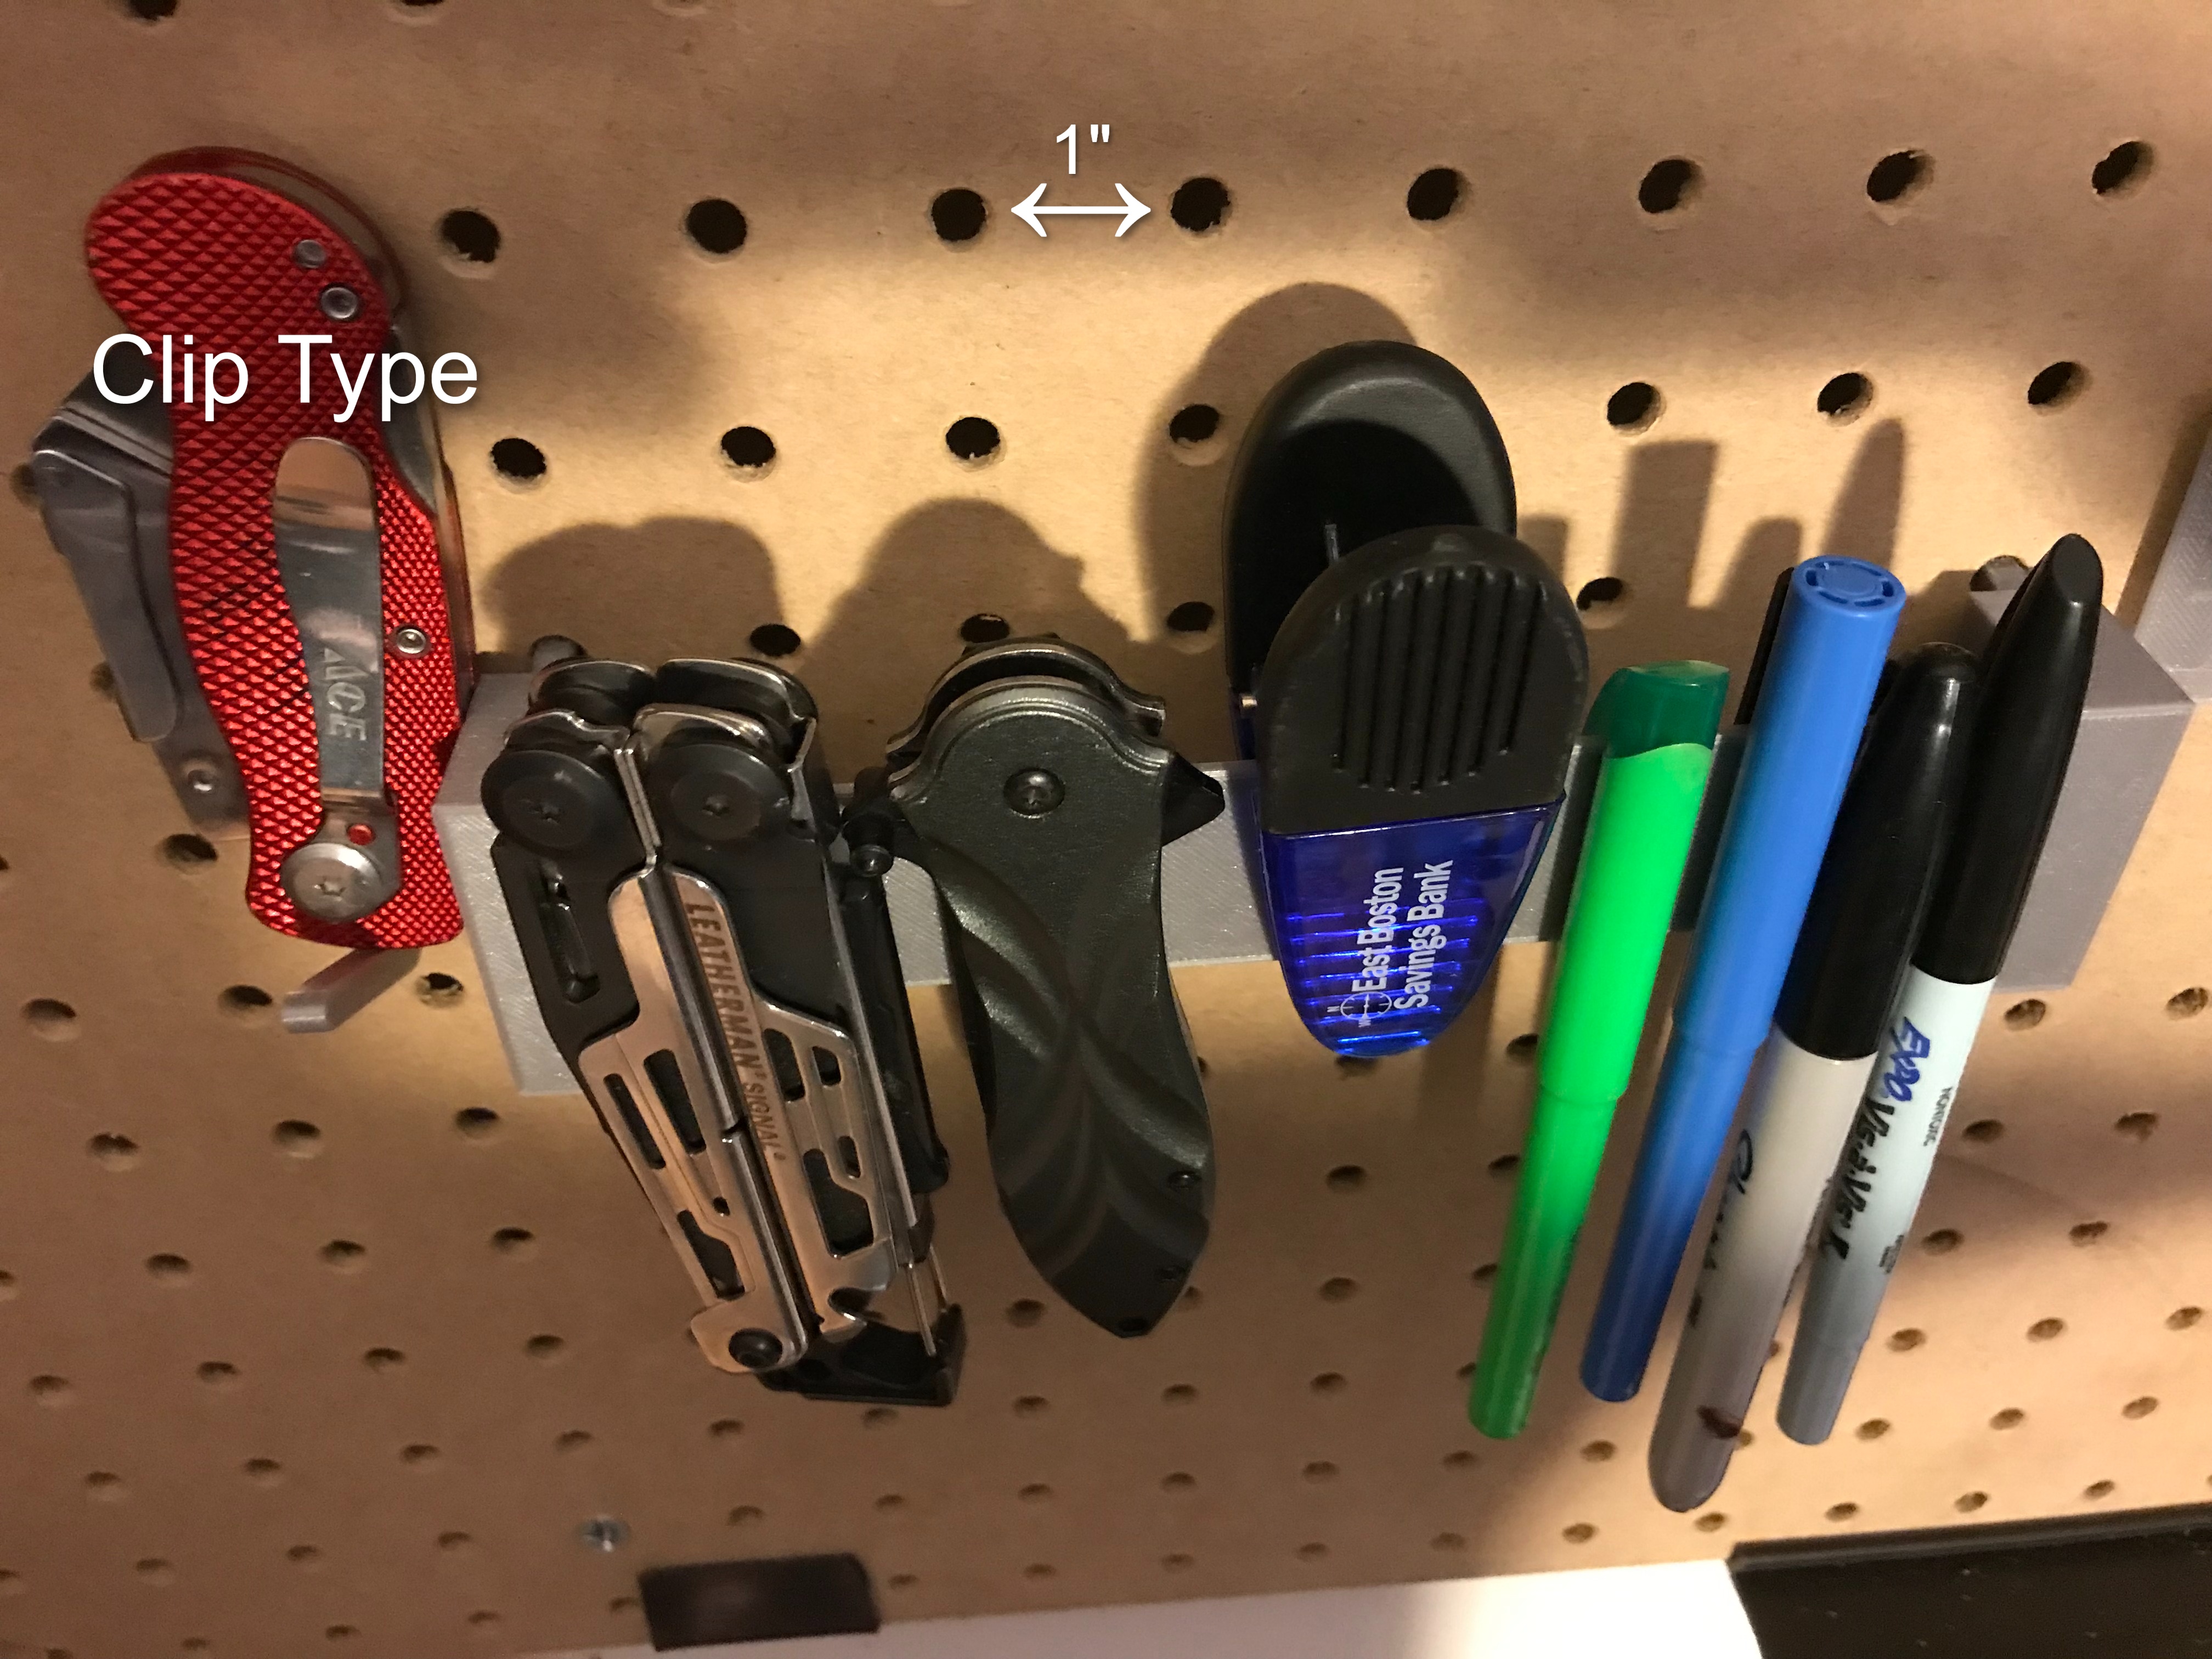 Pegboard Accessory: Upright Pen and Object Holder; anything with a clip on the back